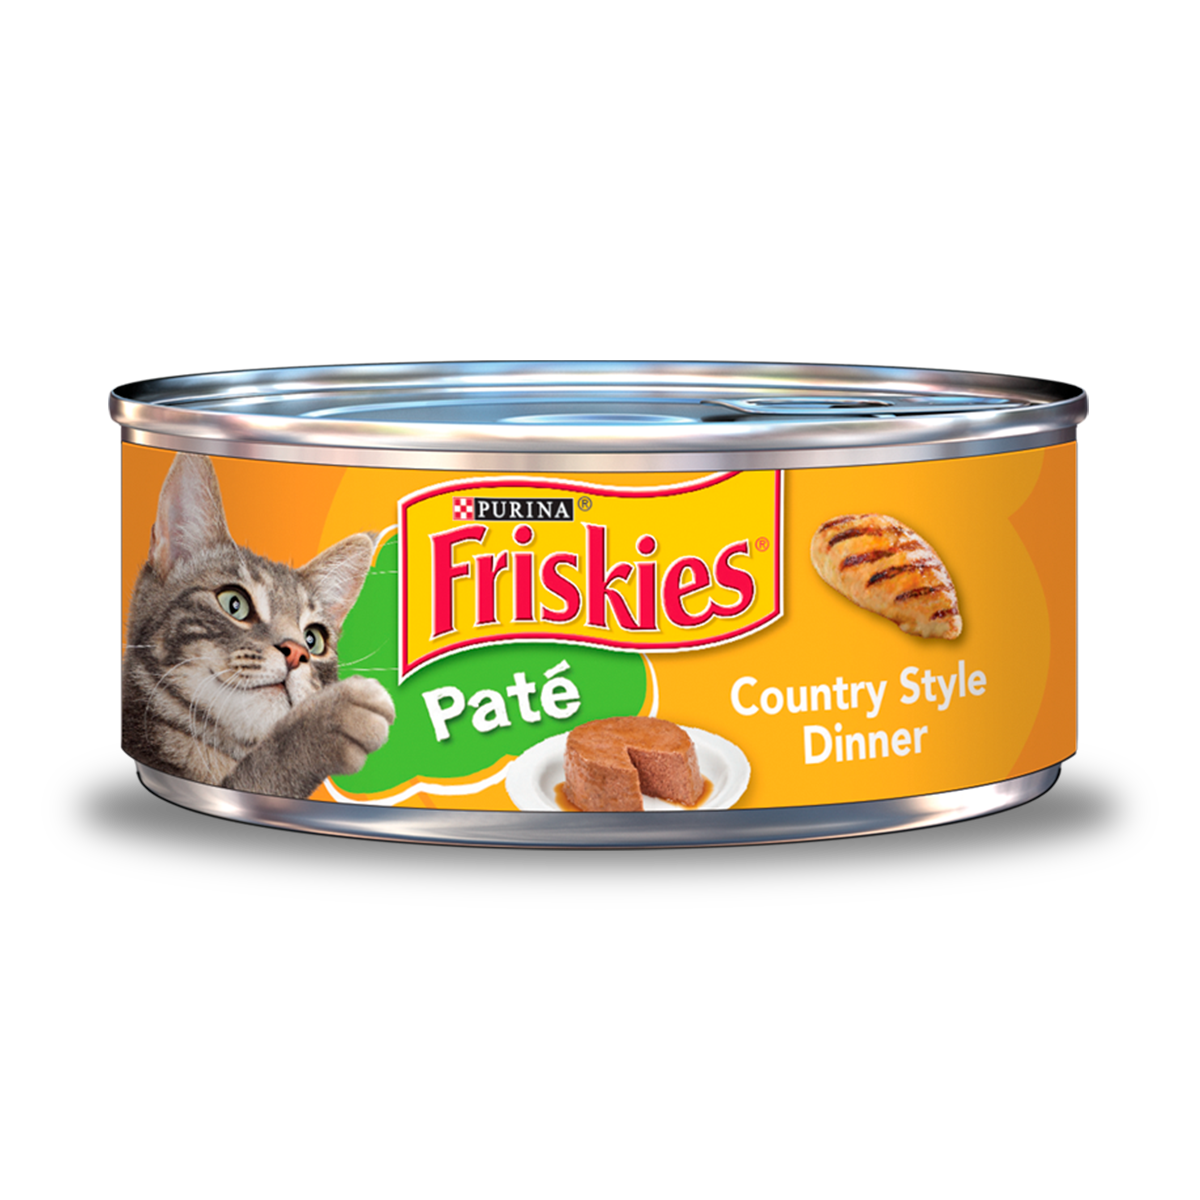 Friskies_Pate_Country_Style_Dinner.png